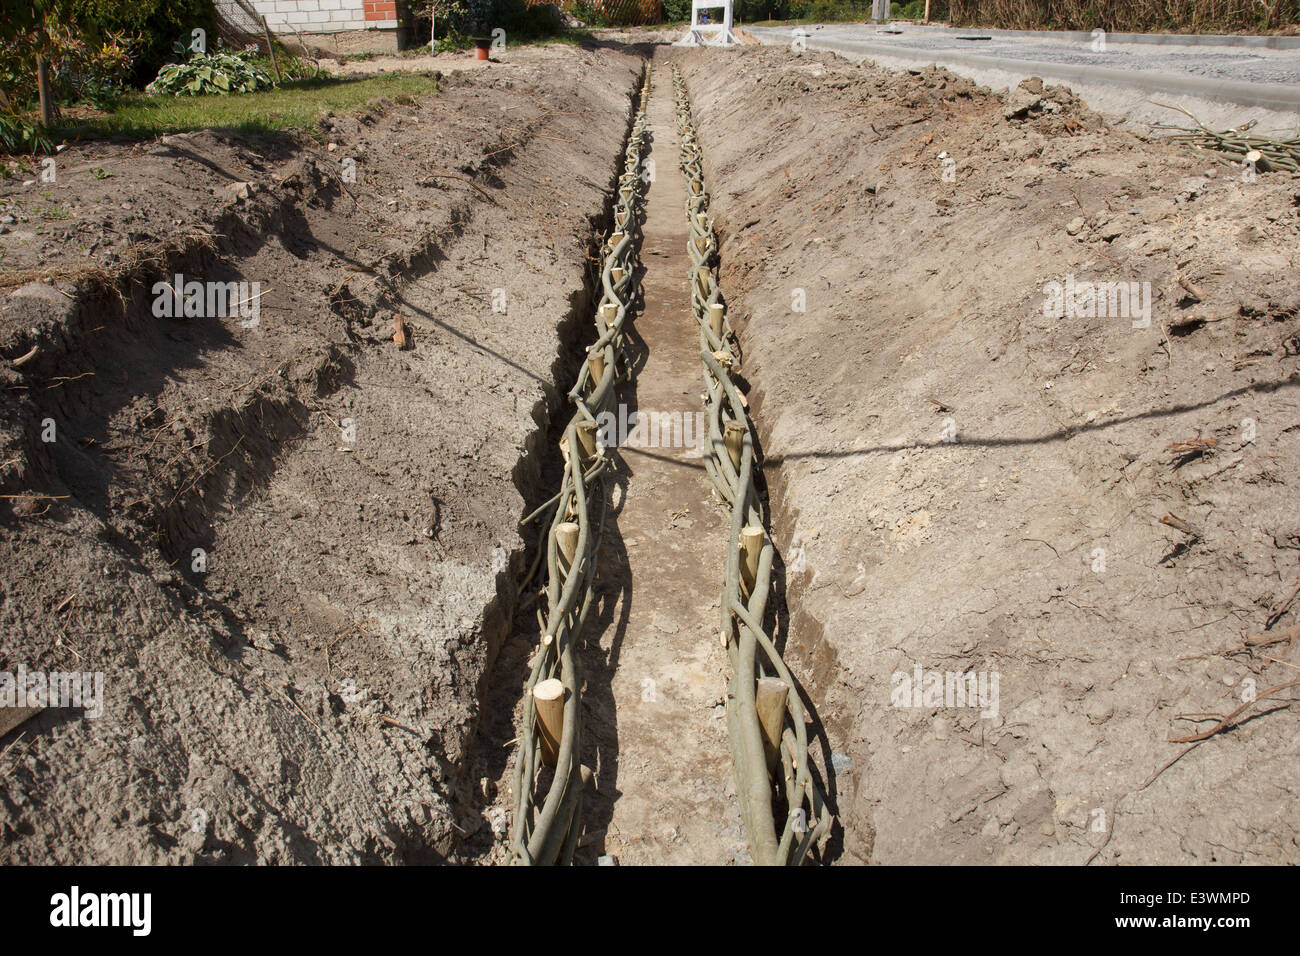 waste water trench Stock Photo